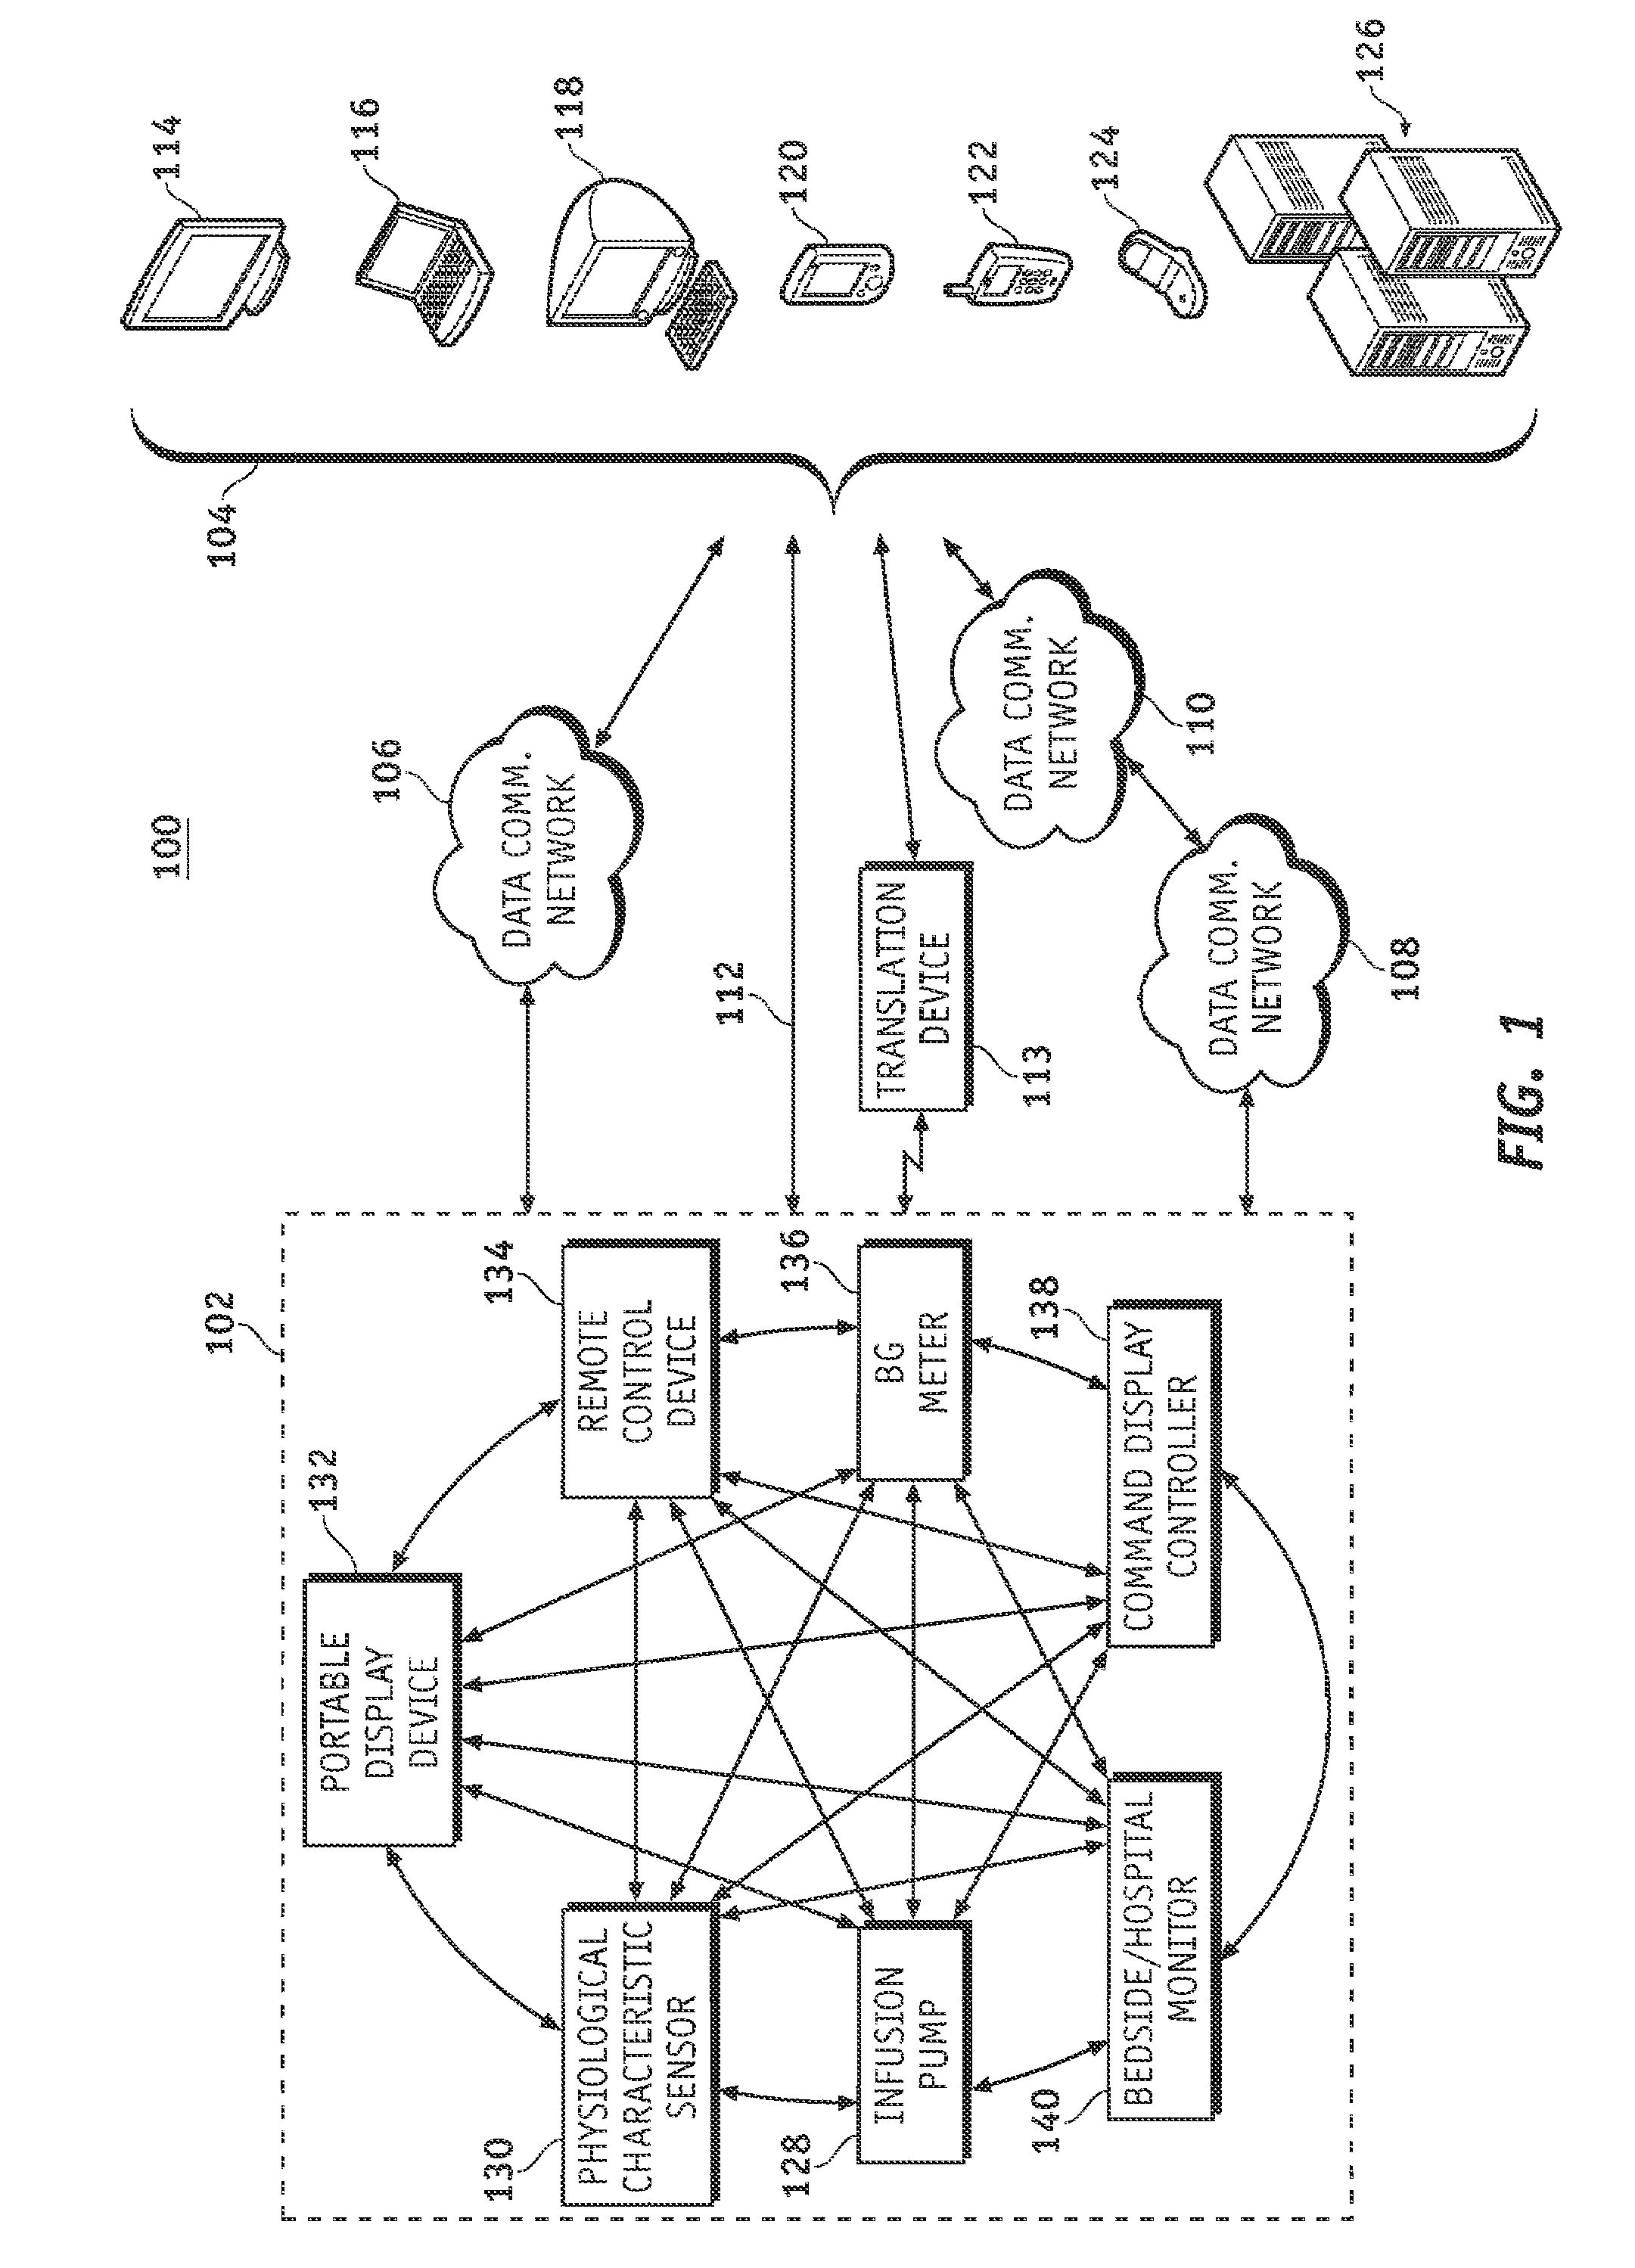 Broadcast data transmission and data packet repeating techniques for a wireless medical device network